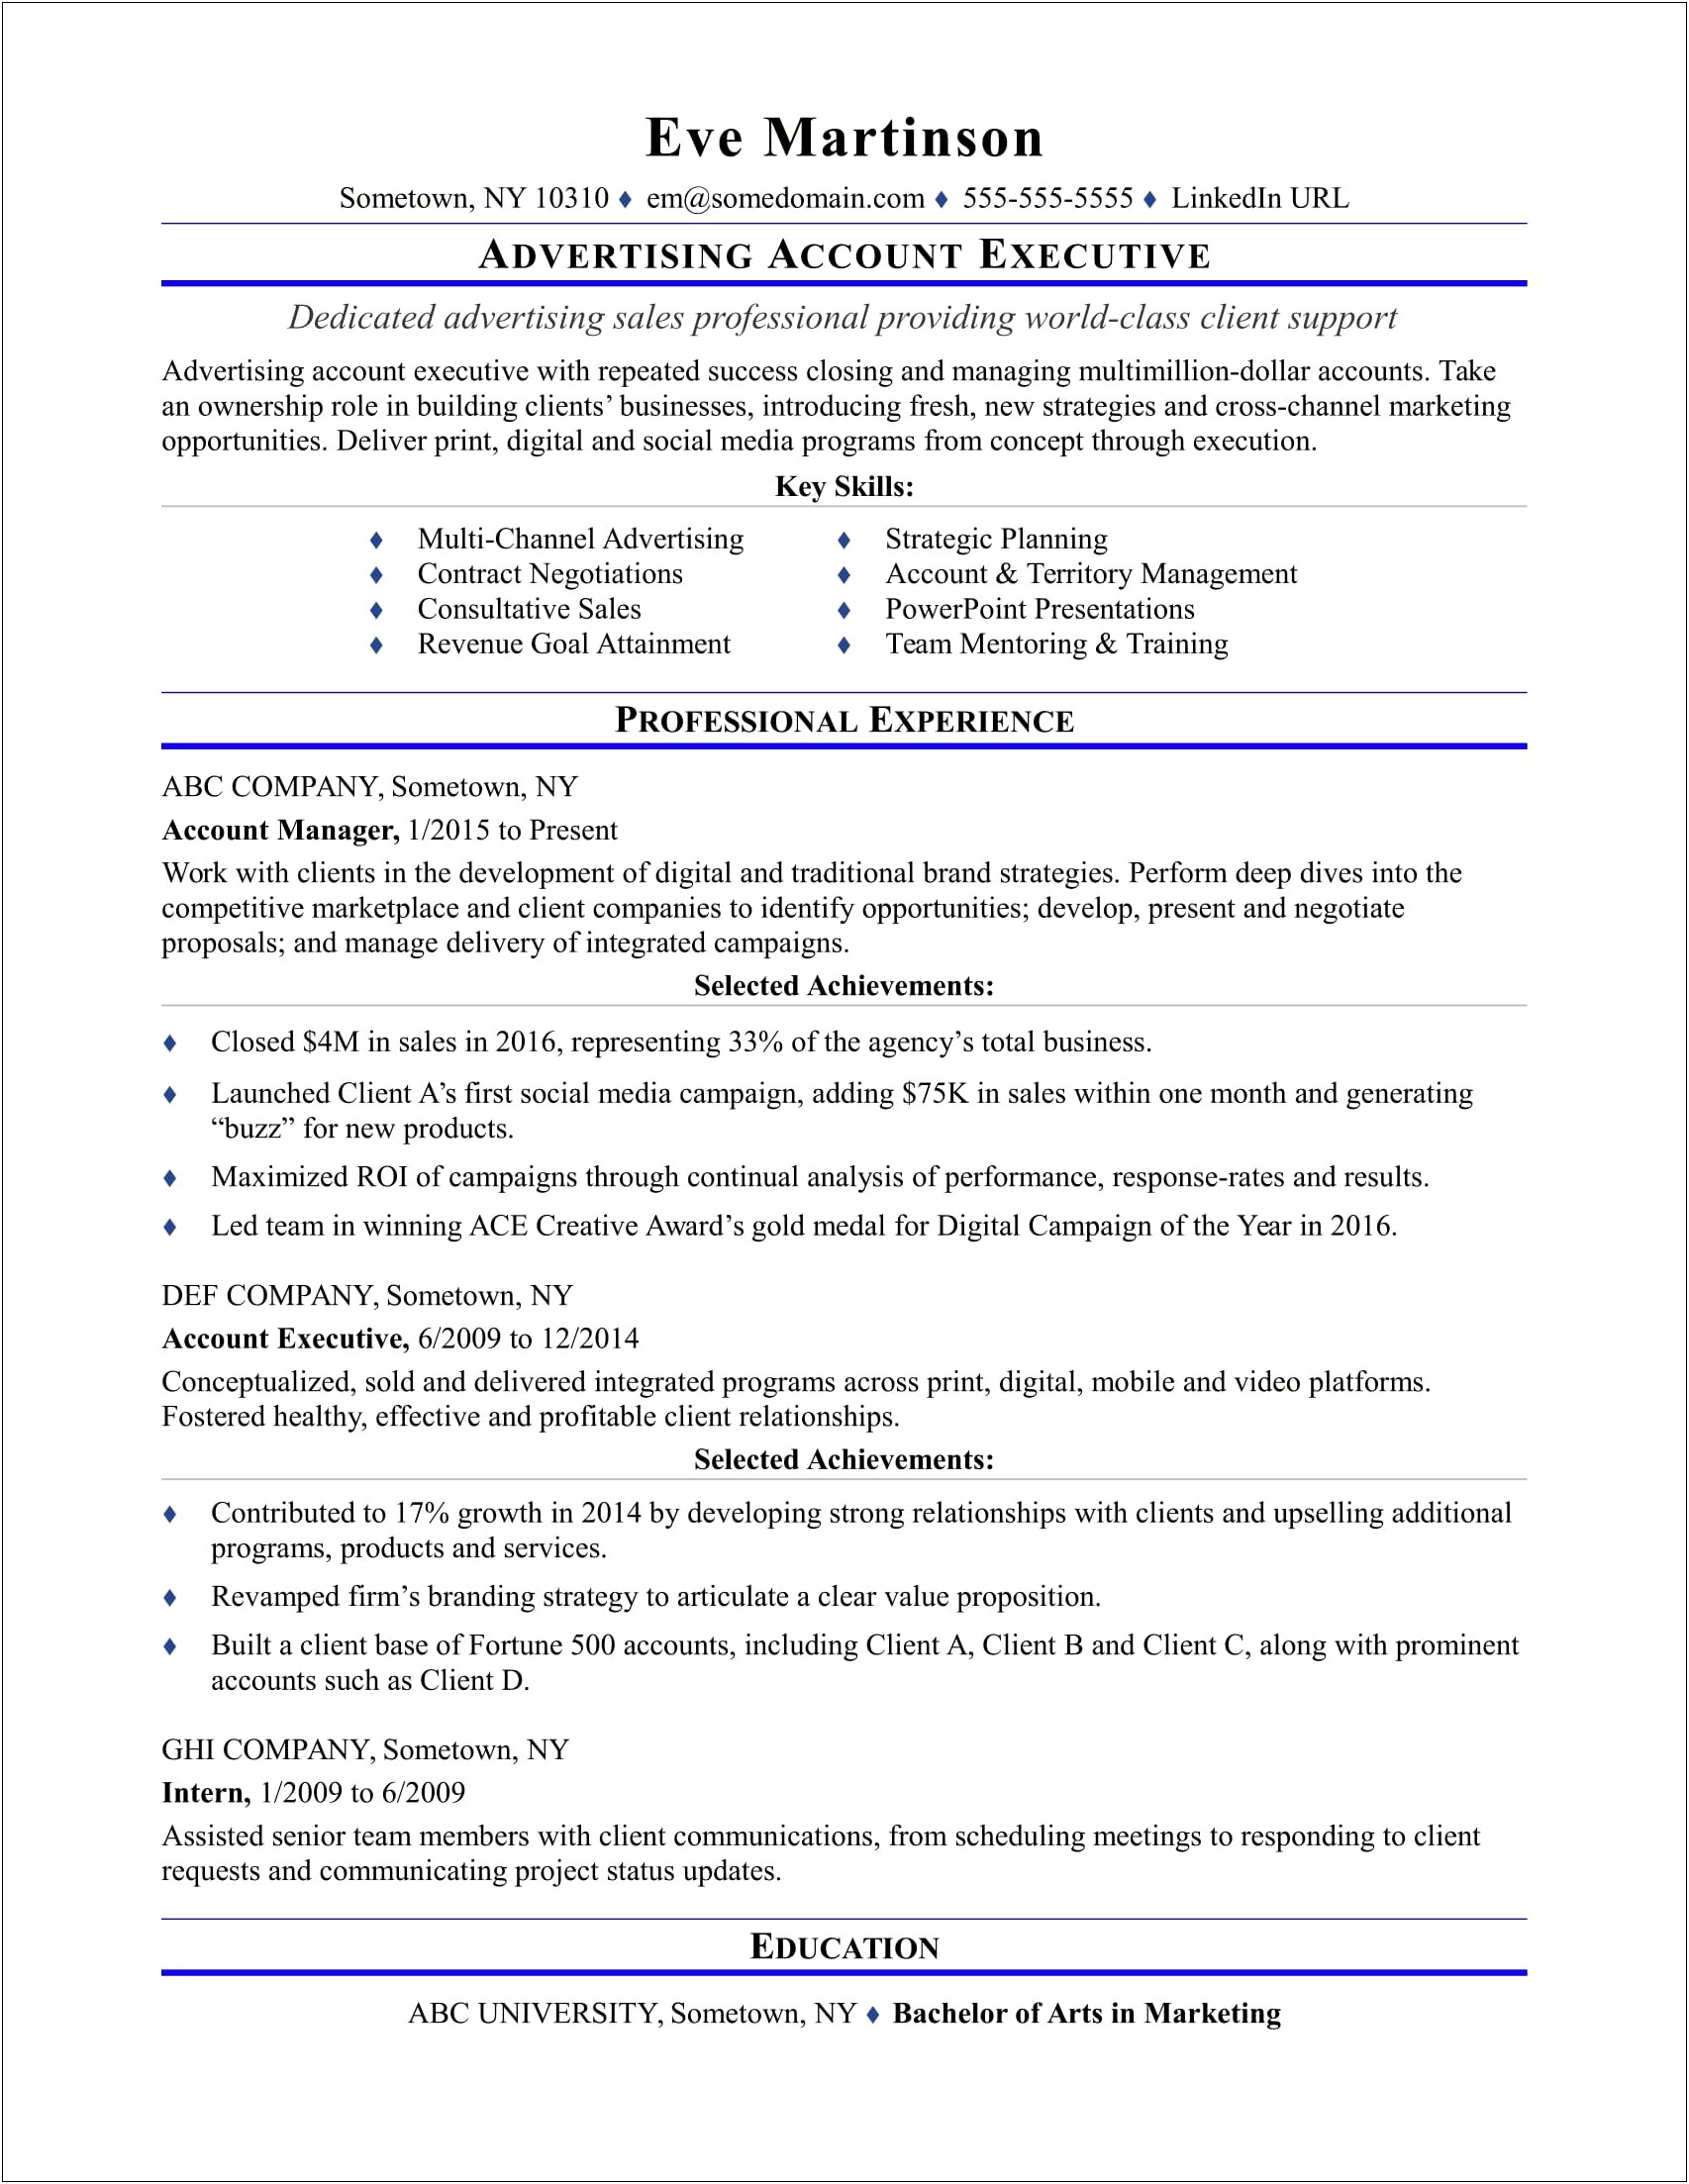 Expert Resume Writing For Today's Job Market